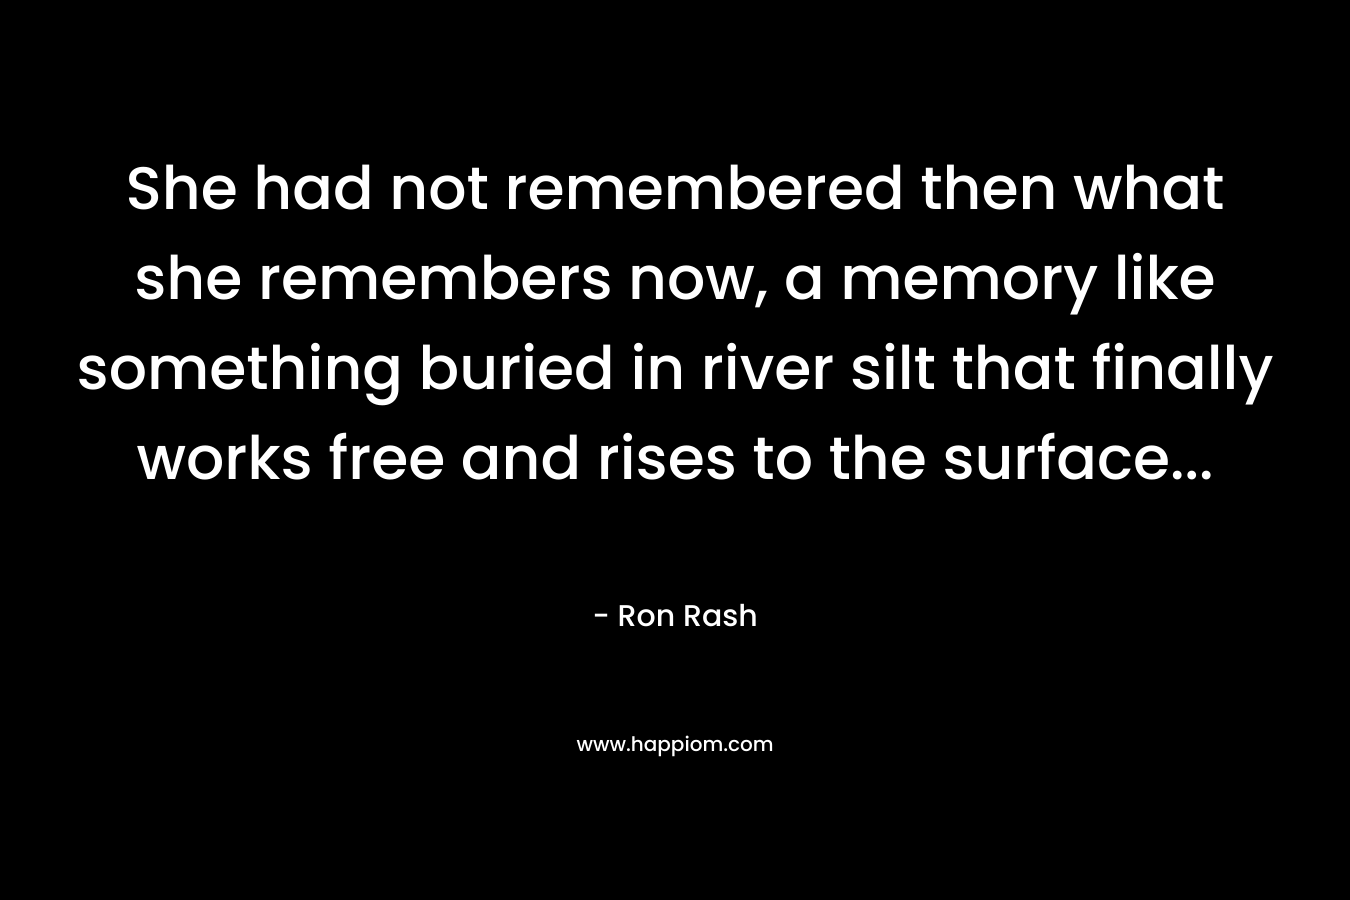 She had not remembered then what she remembers now, a memory like something buried in river silt that finally works free and rises to the surface… – Ron Rash